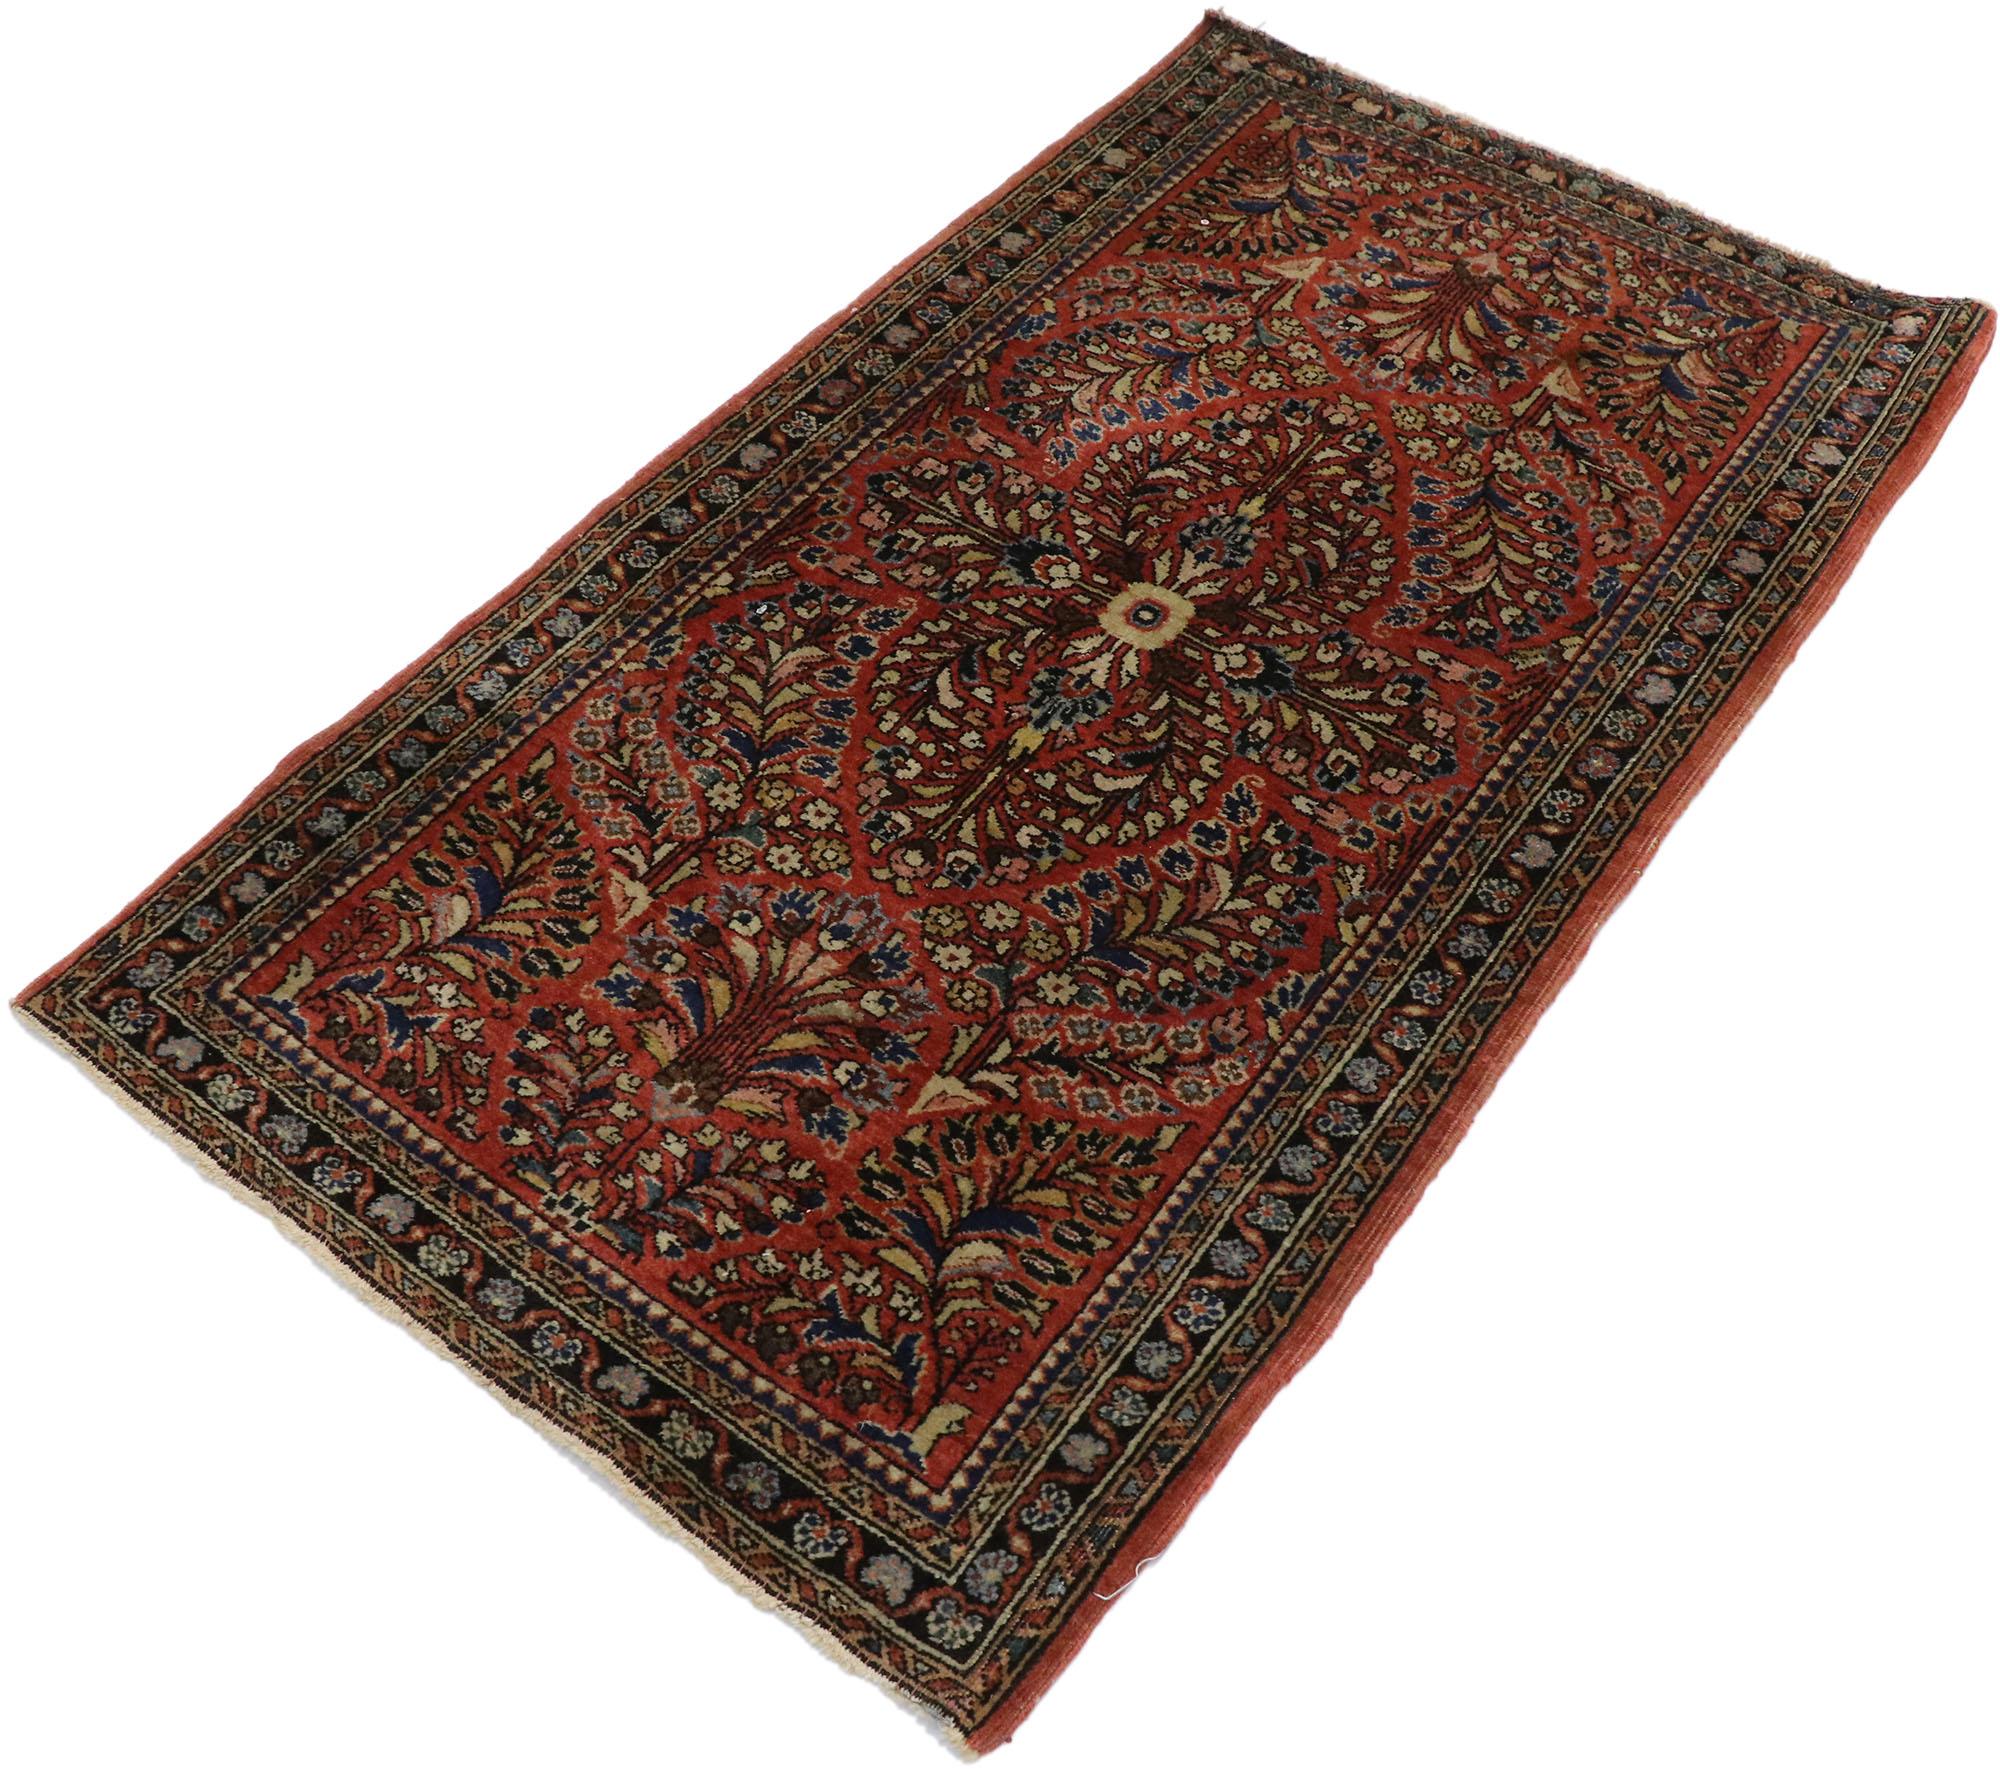 77566, antique Persian Sarouk Accent rug with Victorian style. With timeless appeal, refined colors, and architectural design elements, this hand knotted wool antique Persian Sarouk rug can beautifully blend modern, traditional, rustic, and